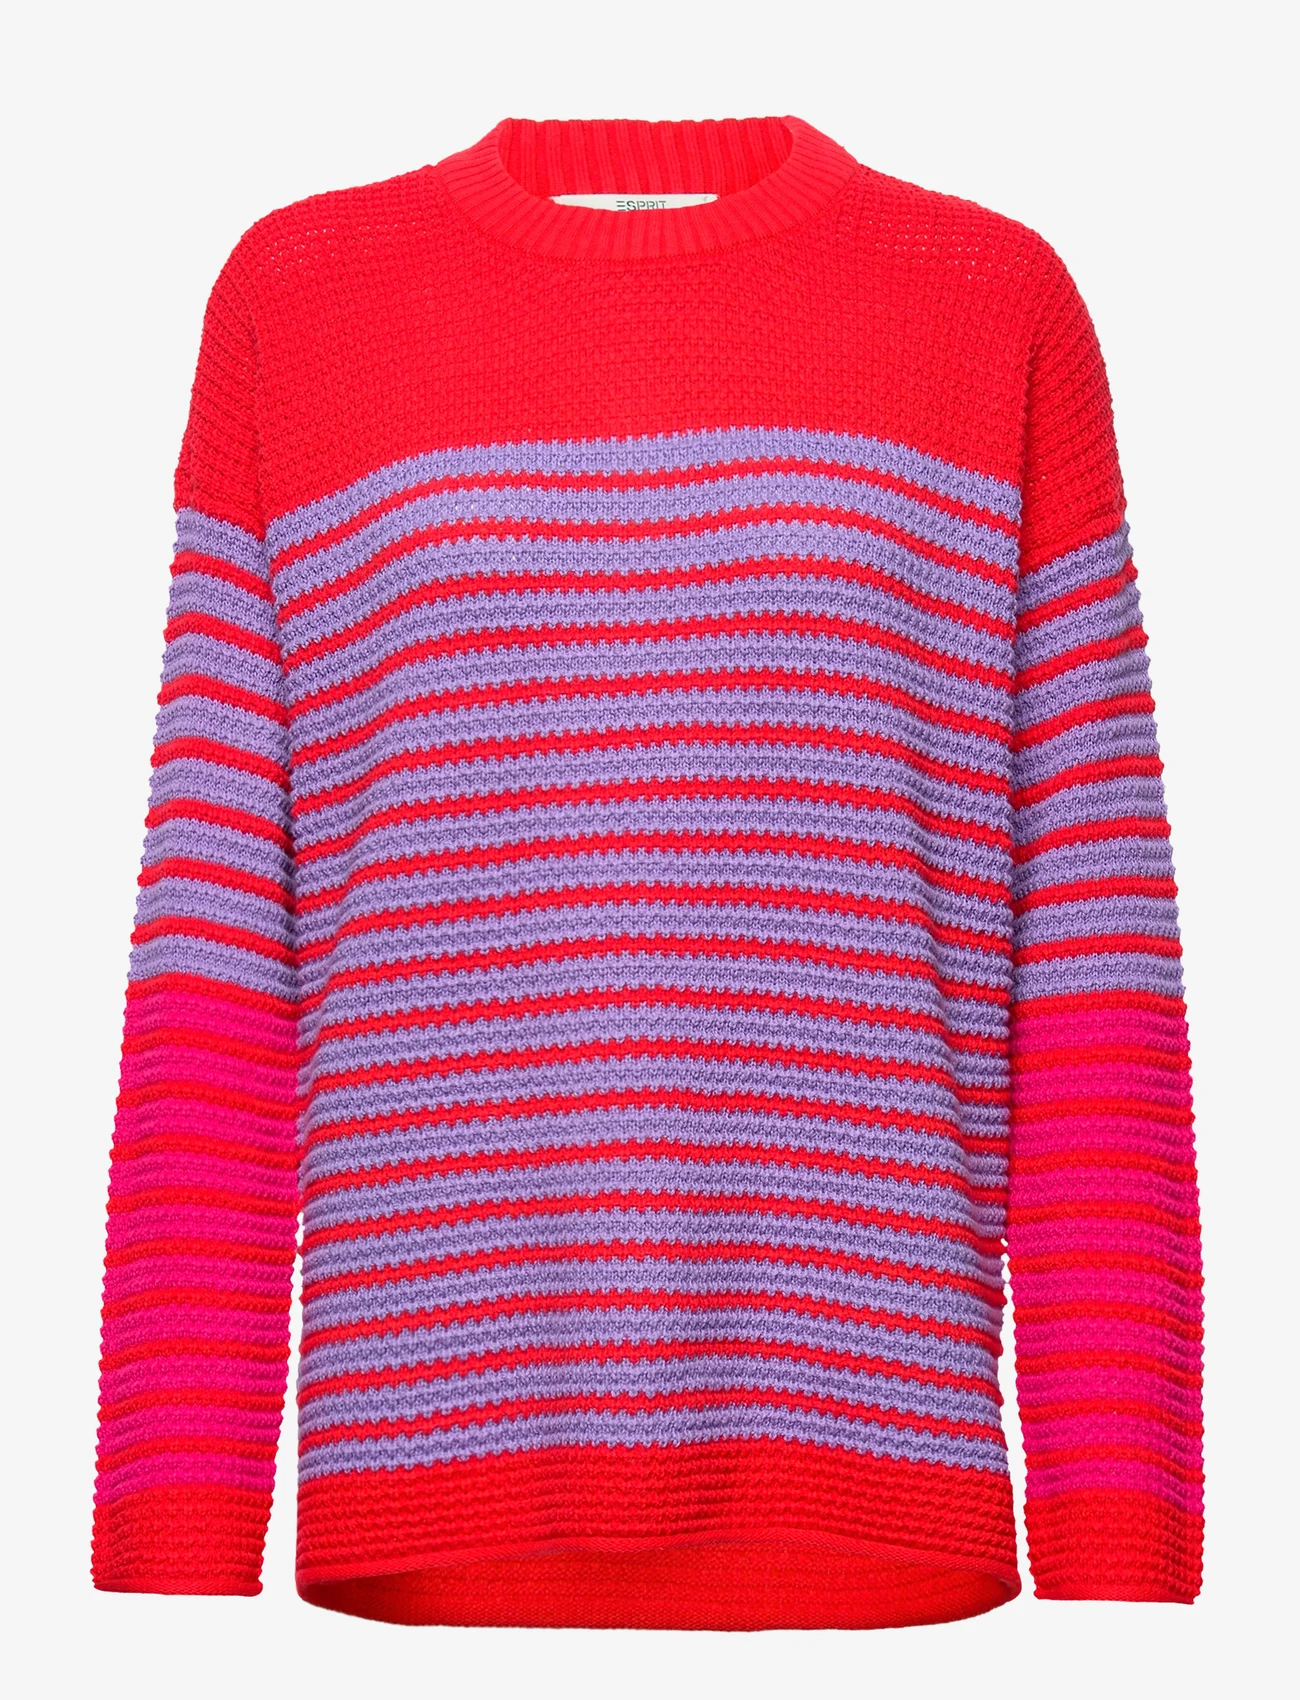 Esprit Casual - Textured knitted jumper - swetry - red 4 - 0